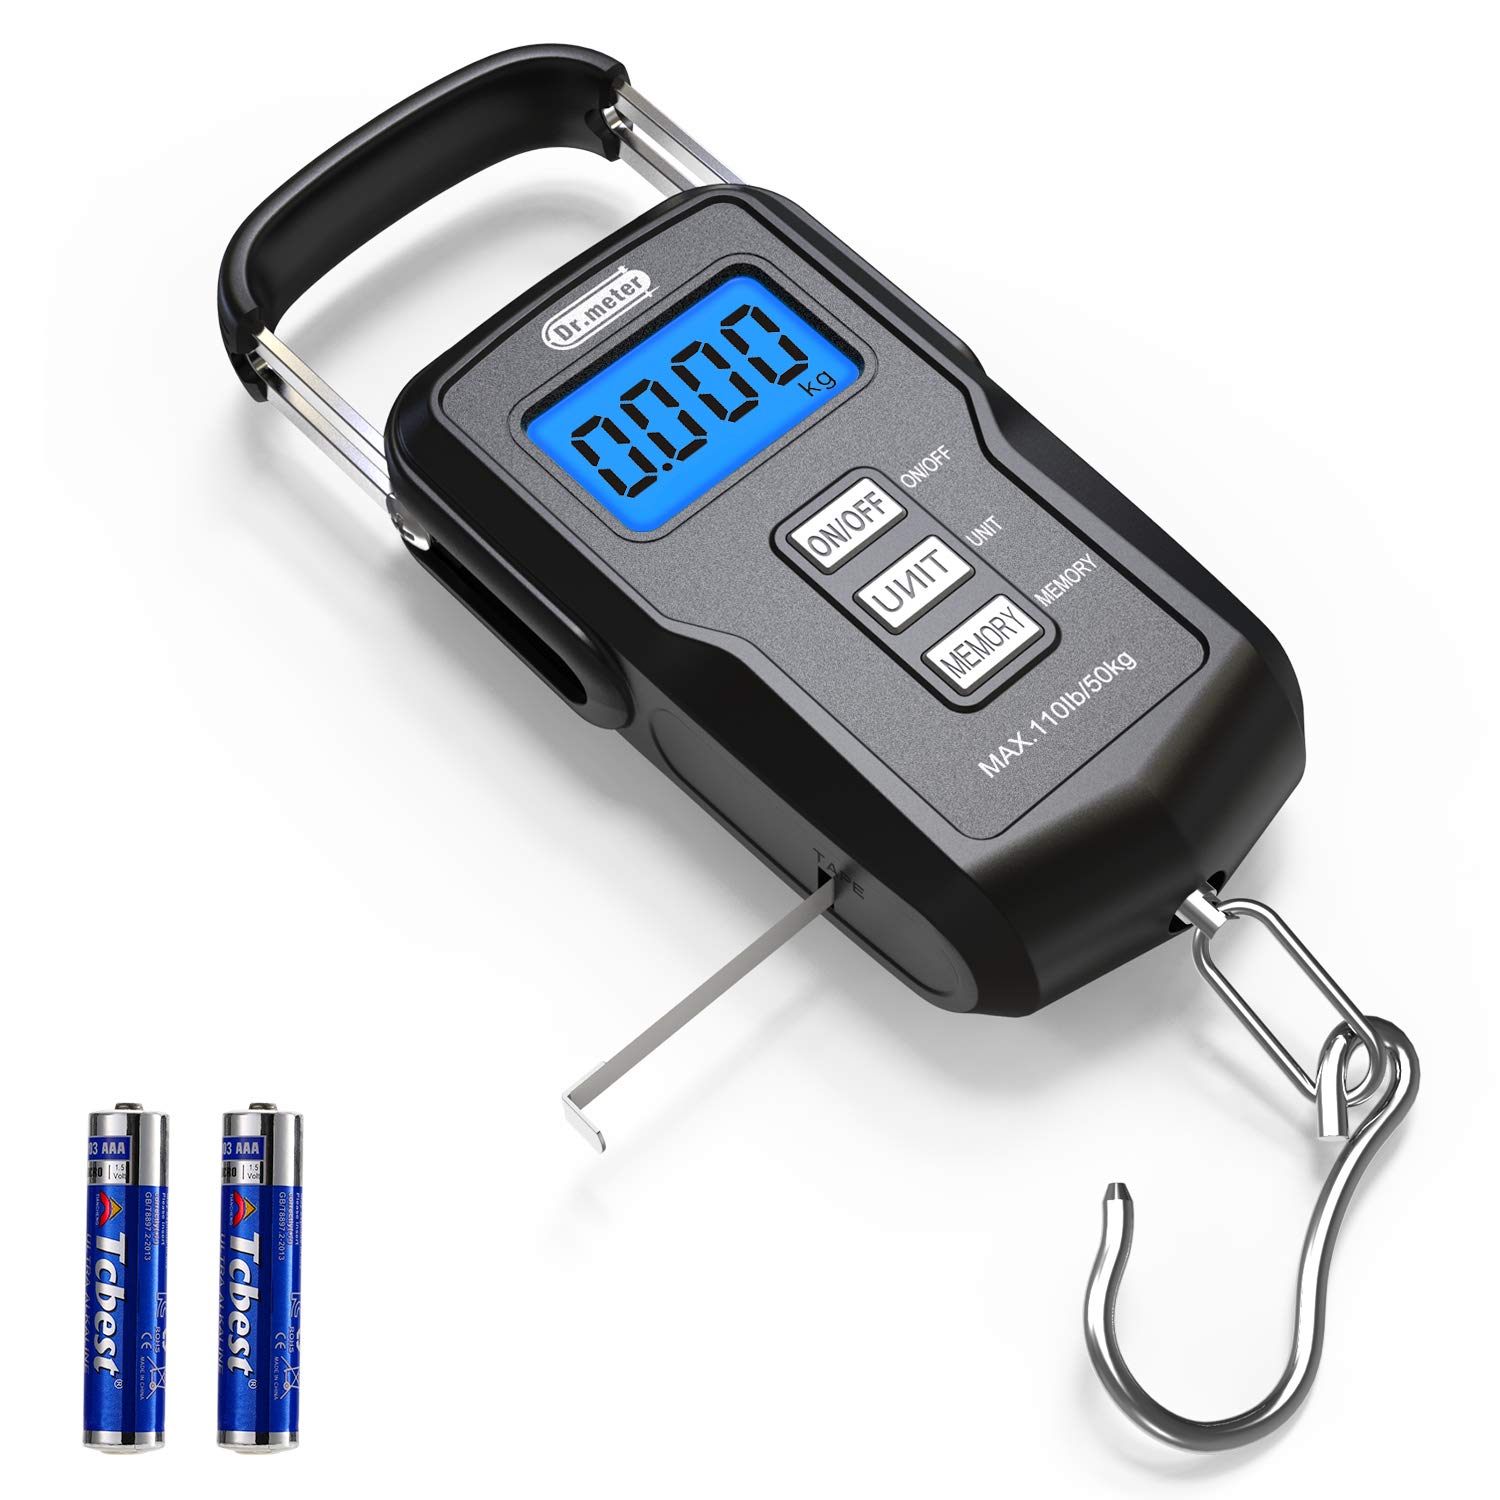 Luggage Scale, PS02, Dr.meter